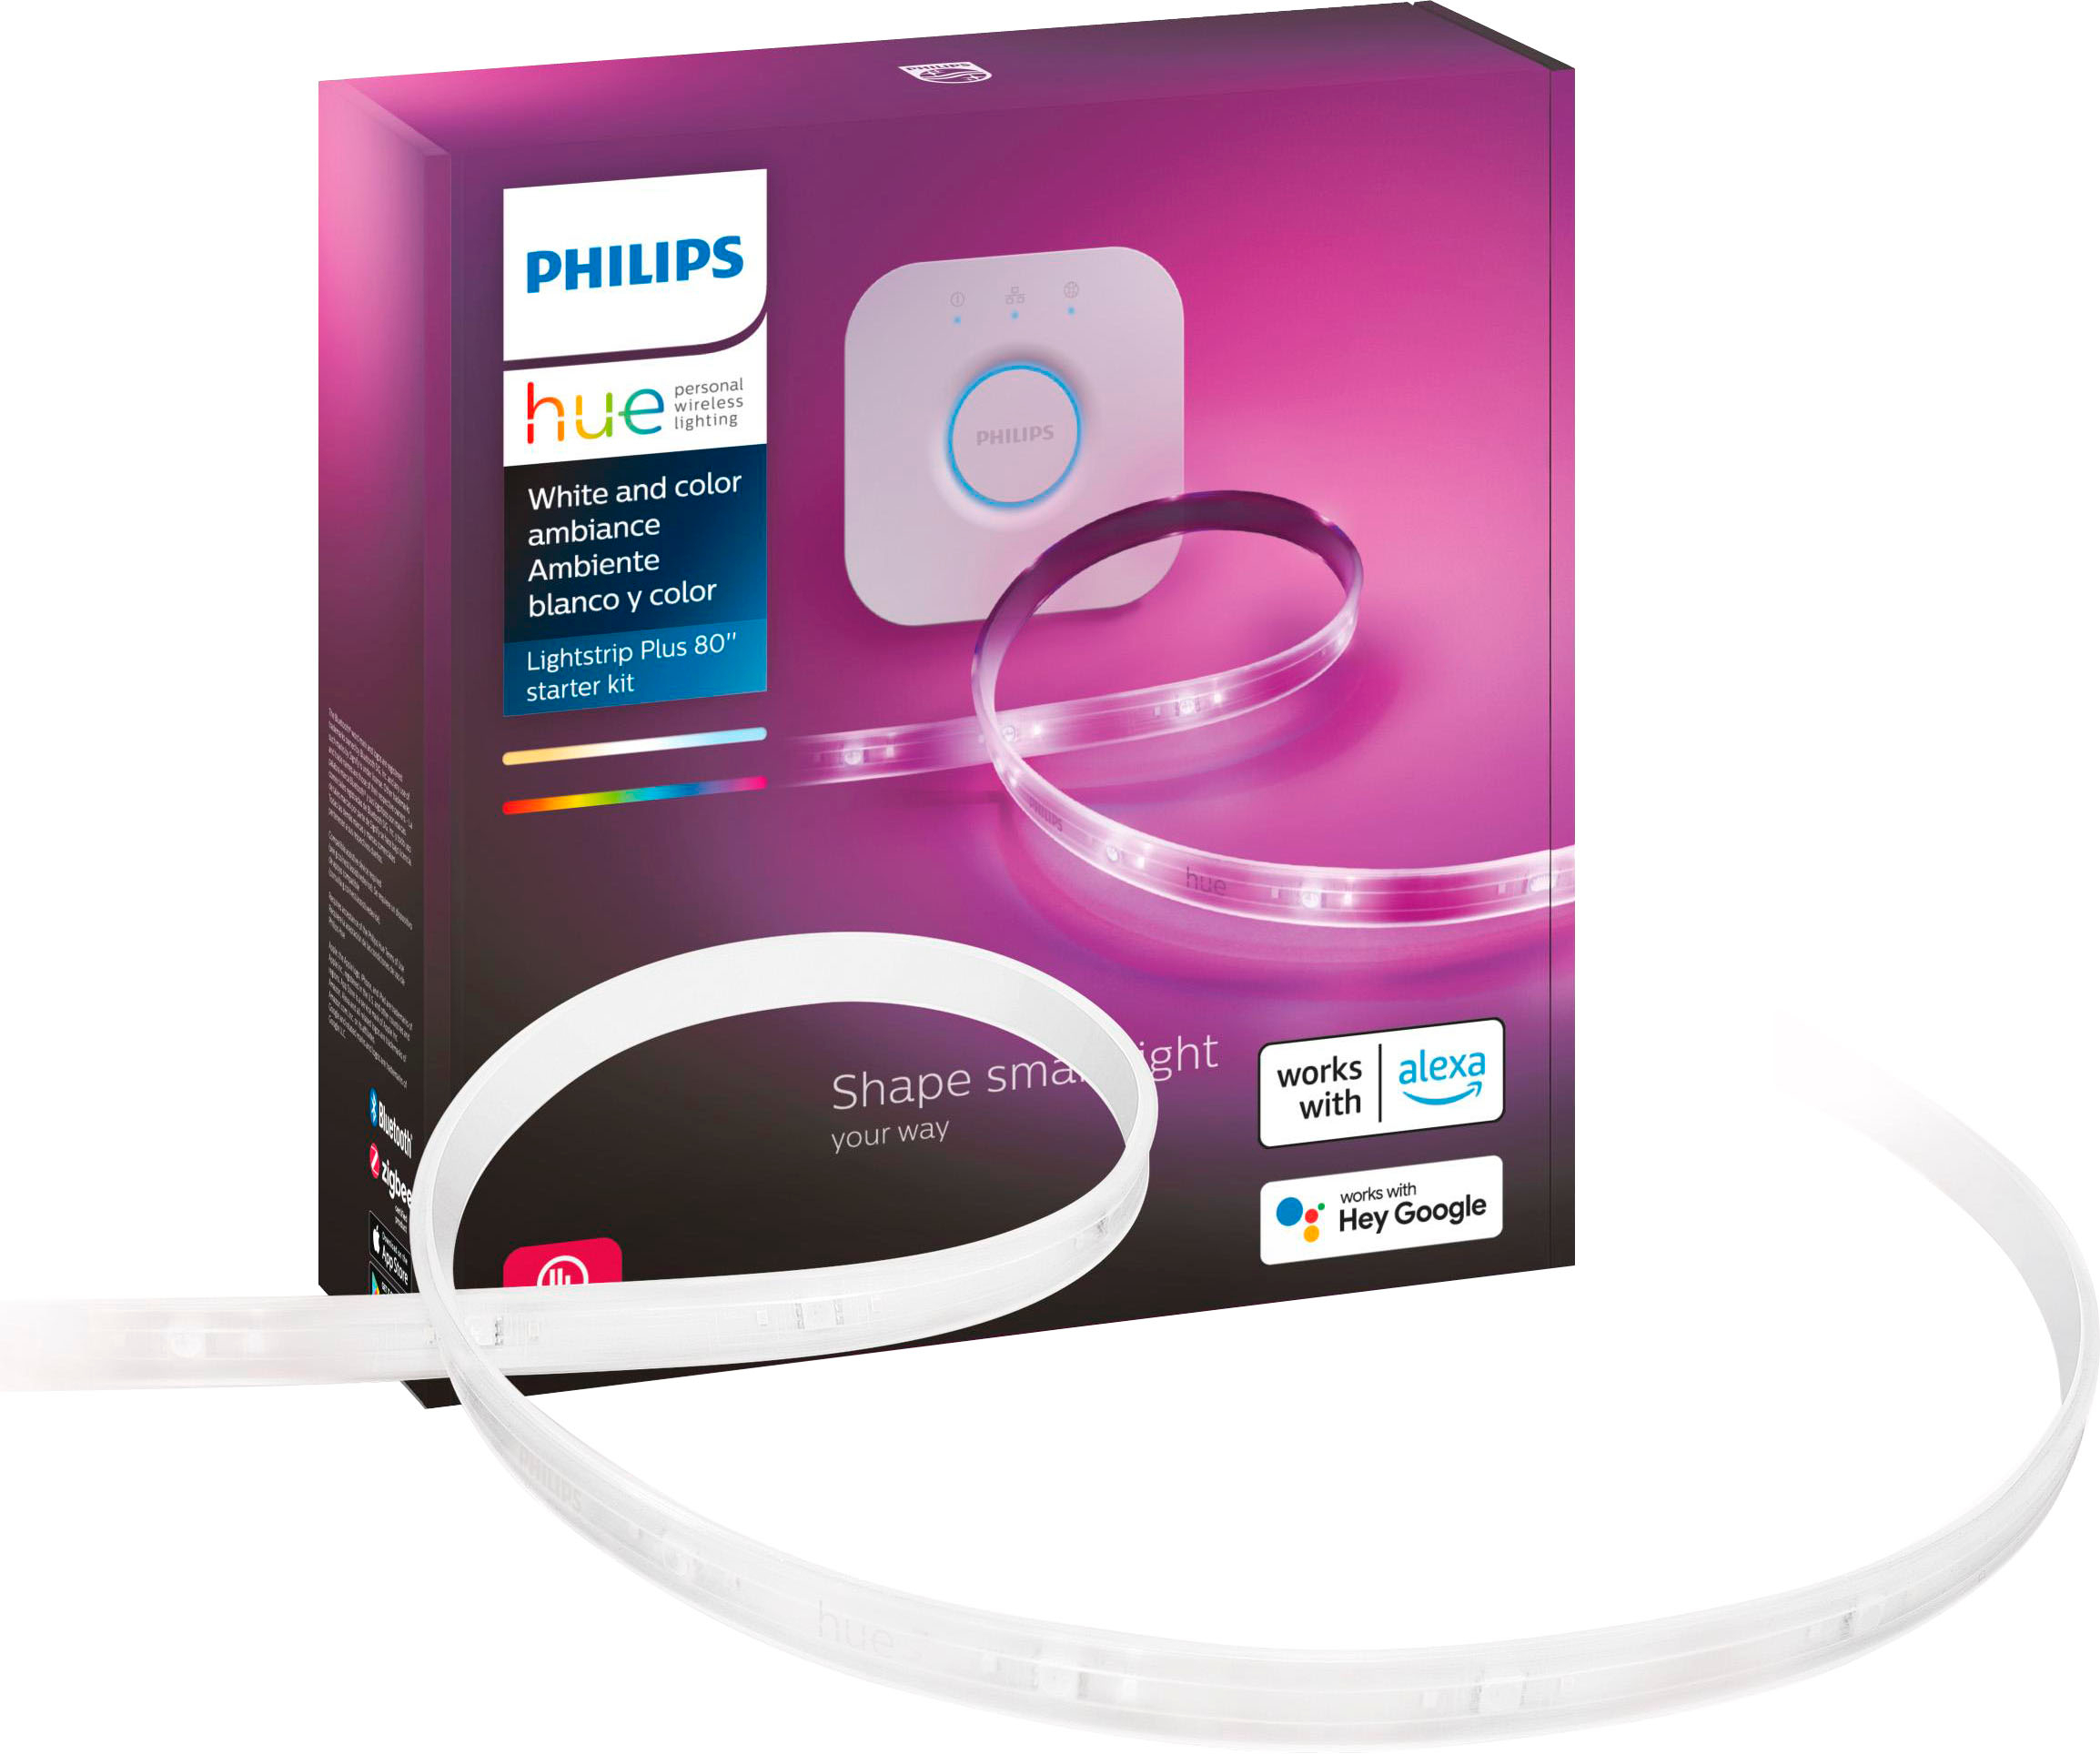 Philips Hue Bluetooth Lightstrip Plus 80-inch Starter Kit White Color Ambiance 555342 - Best Buy